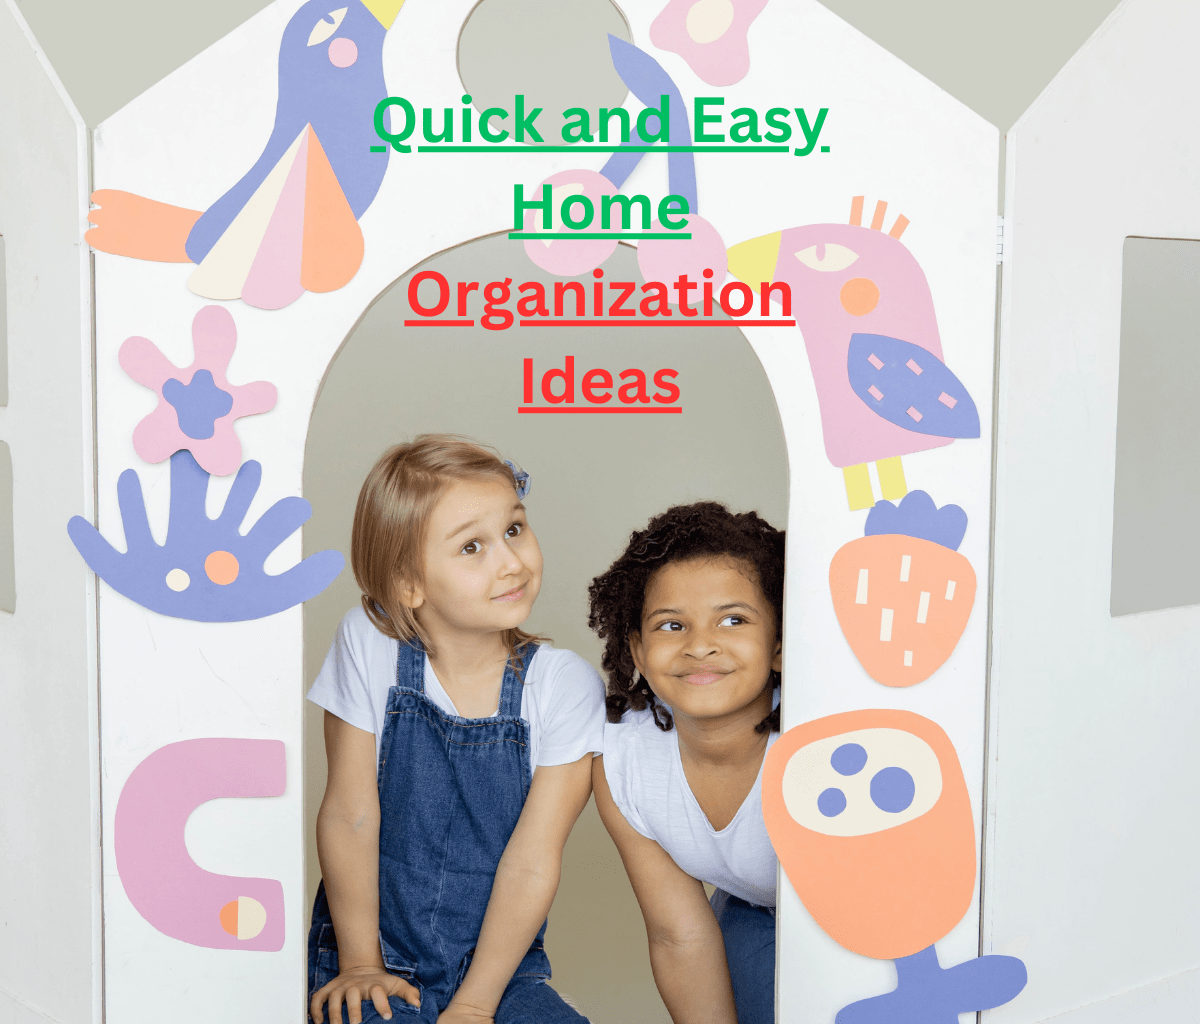 Quick and Easy Home Organization Ideas